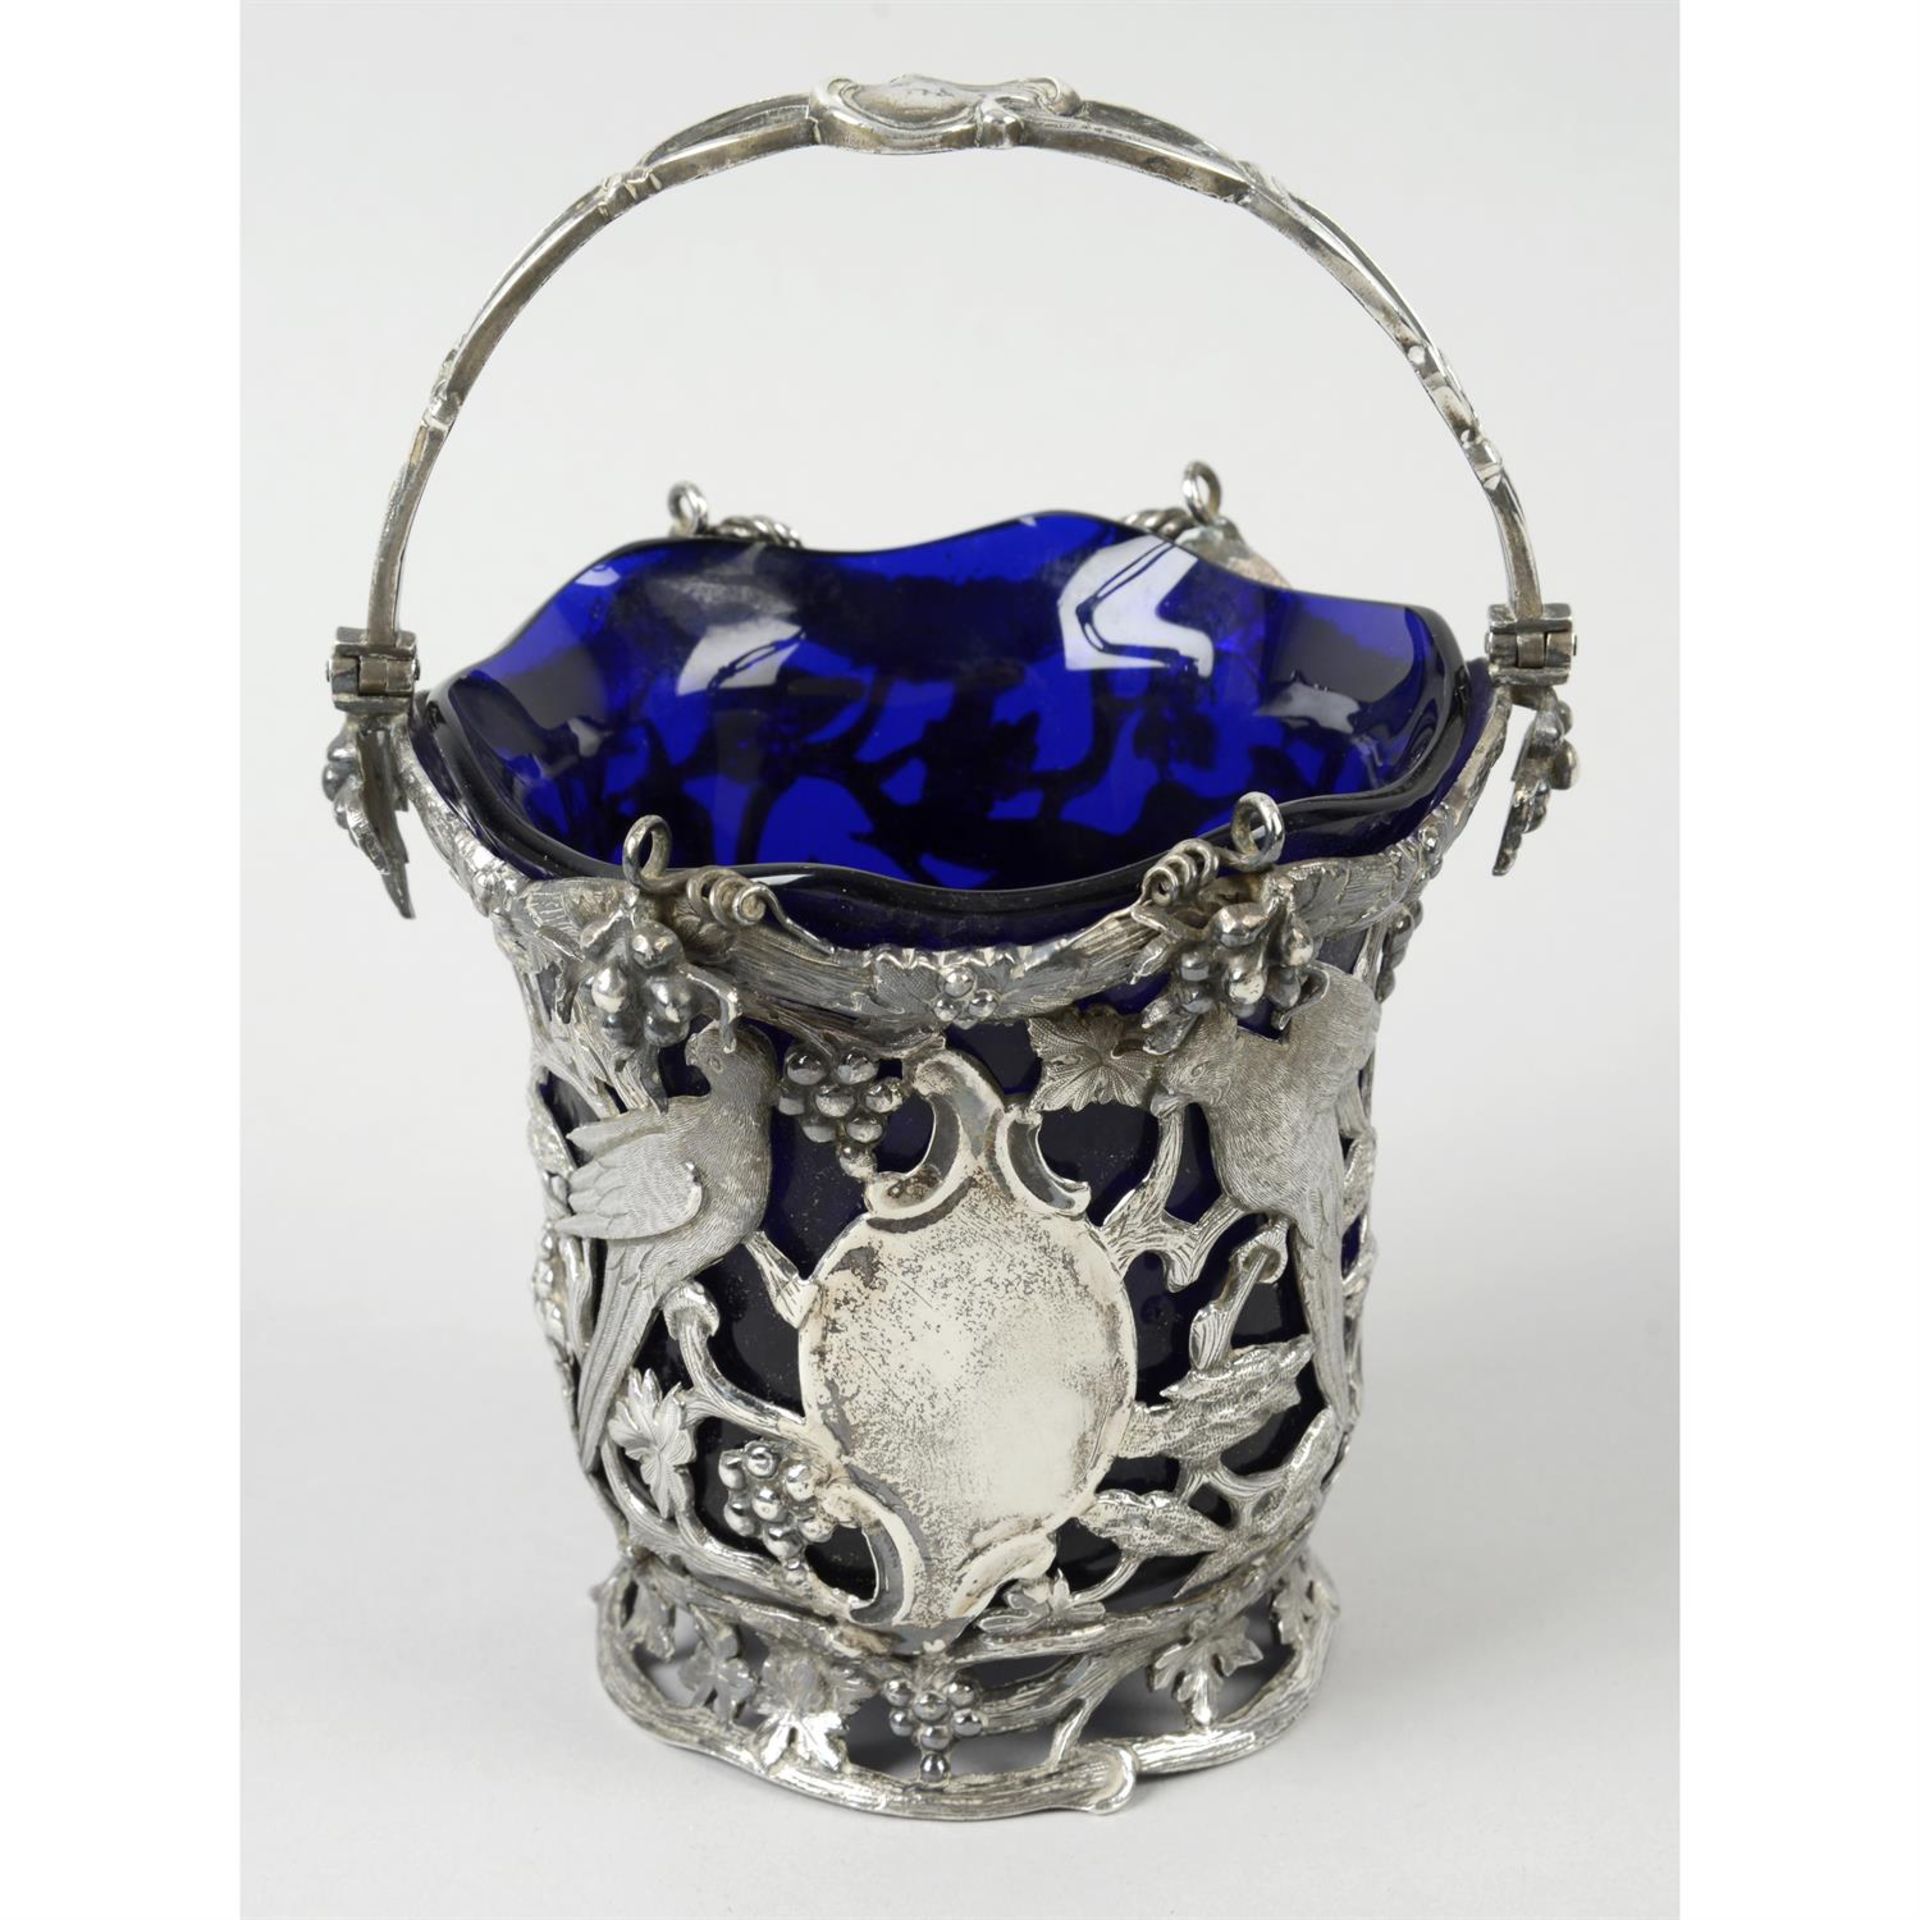 A mid-Victorian silver pierced swing-handled basket with glass liner.